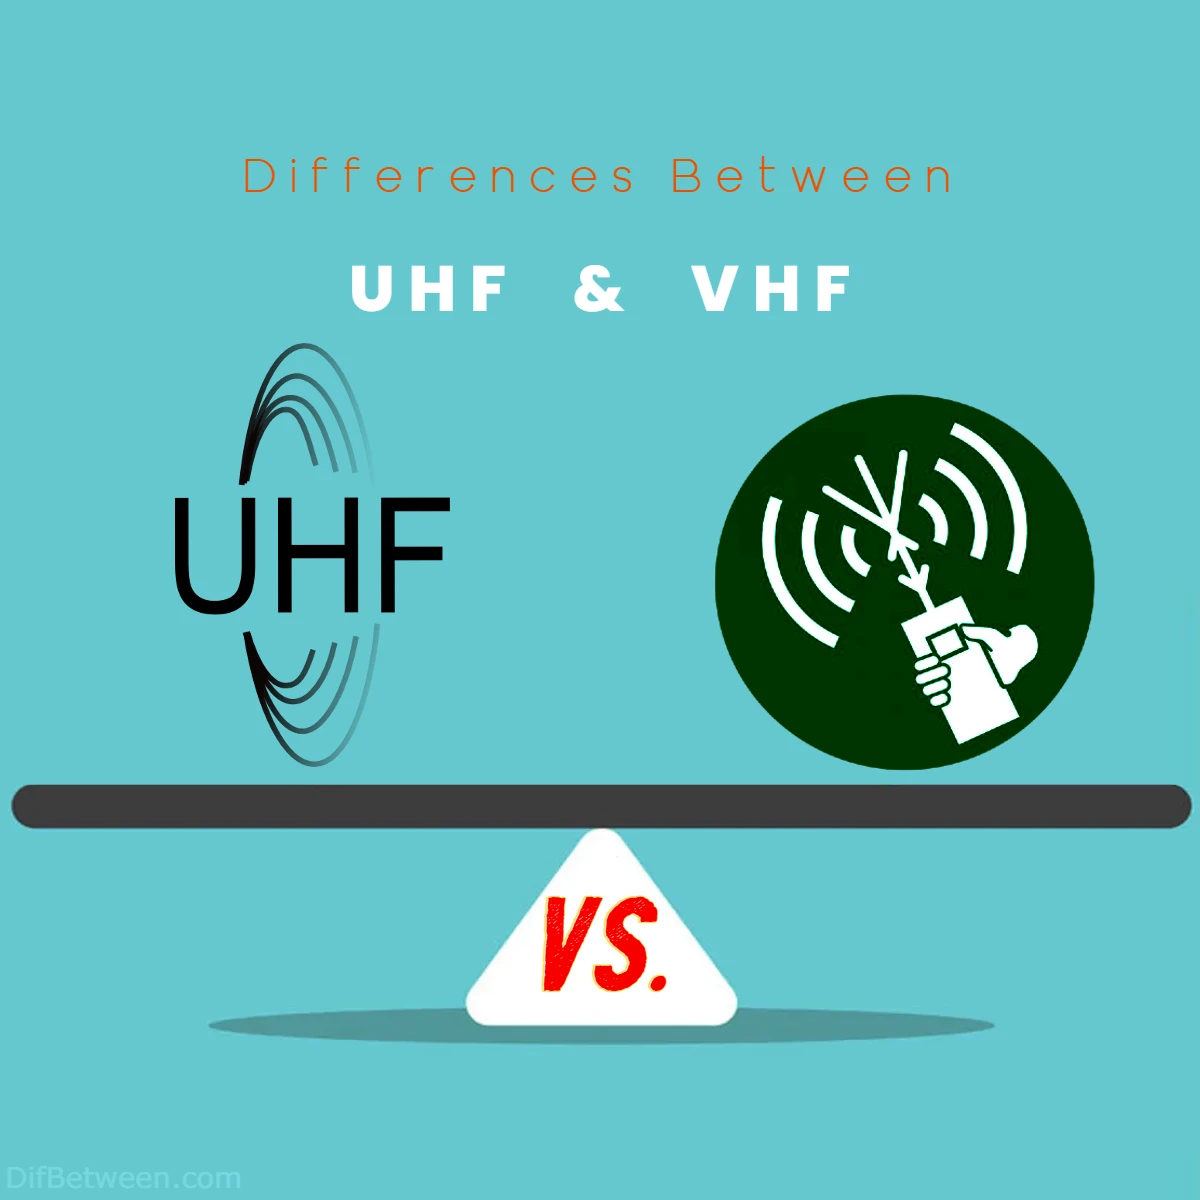 Differences Between UHF vs VHF